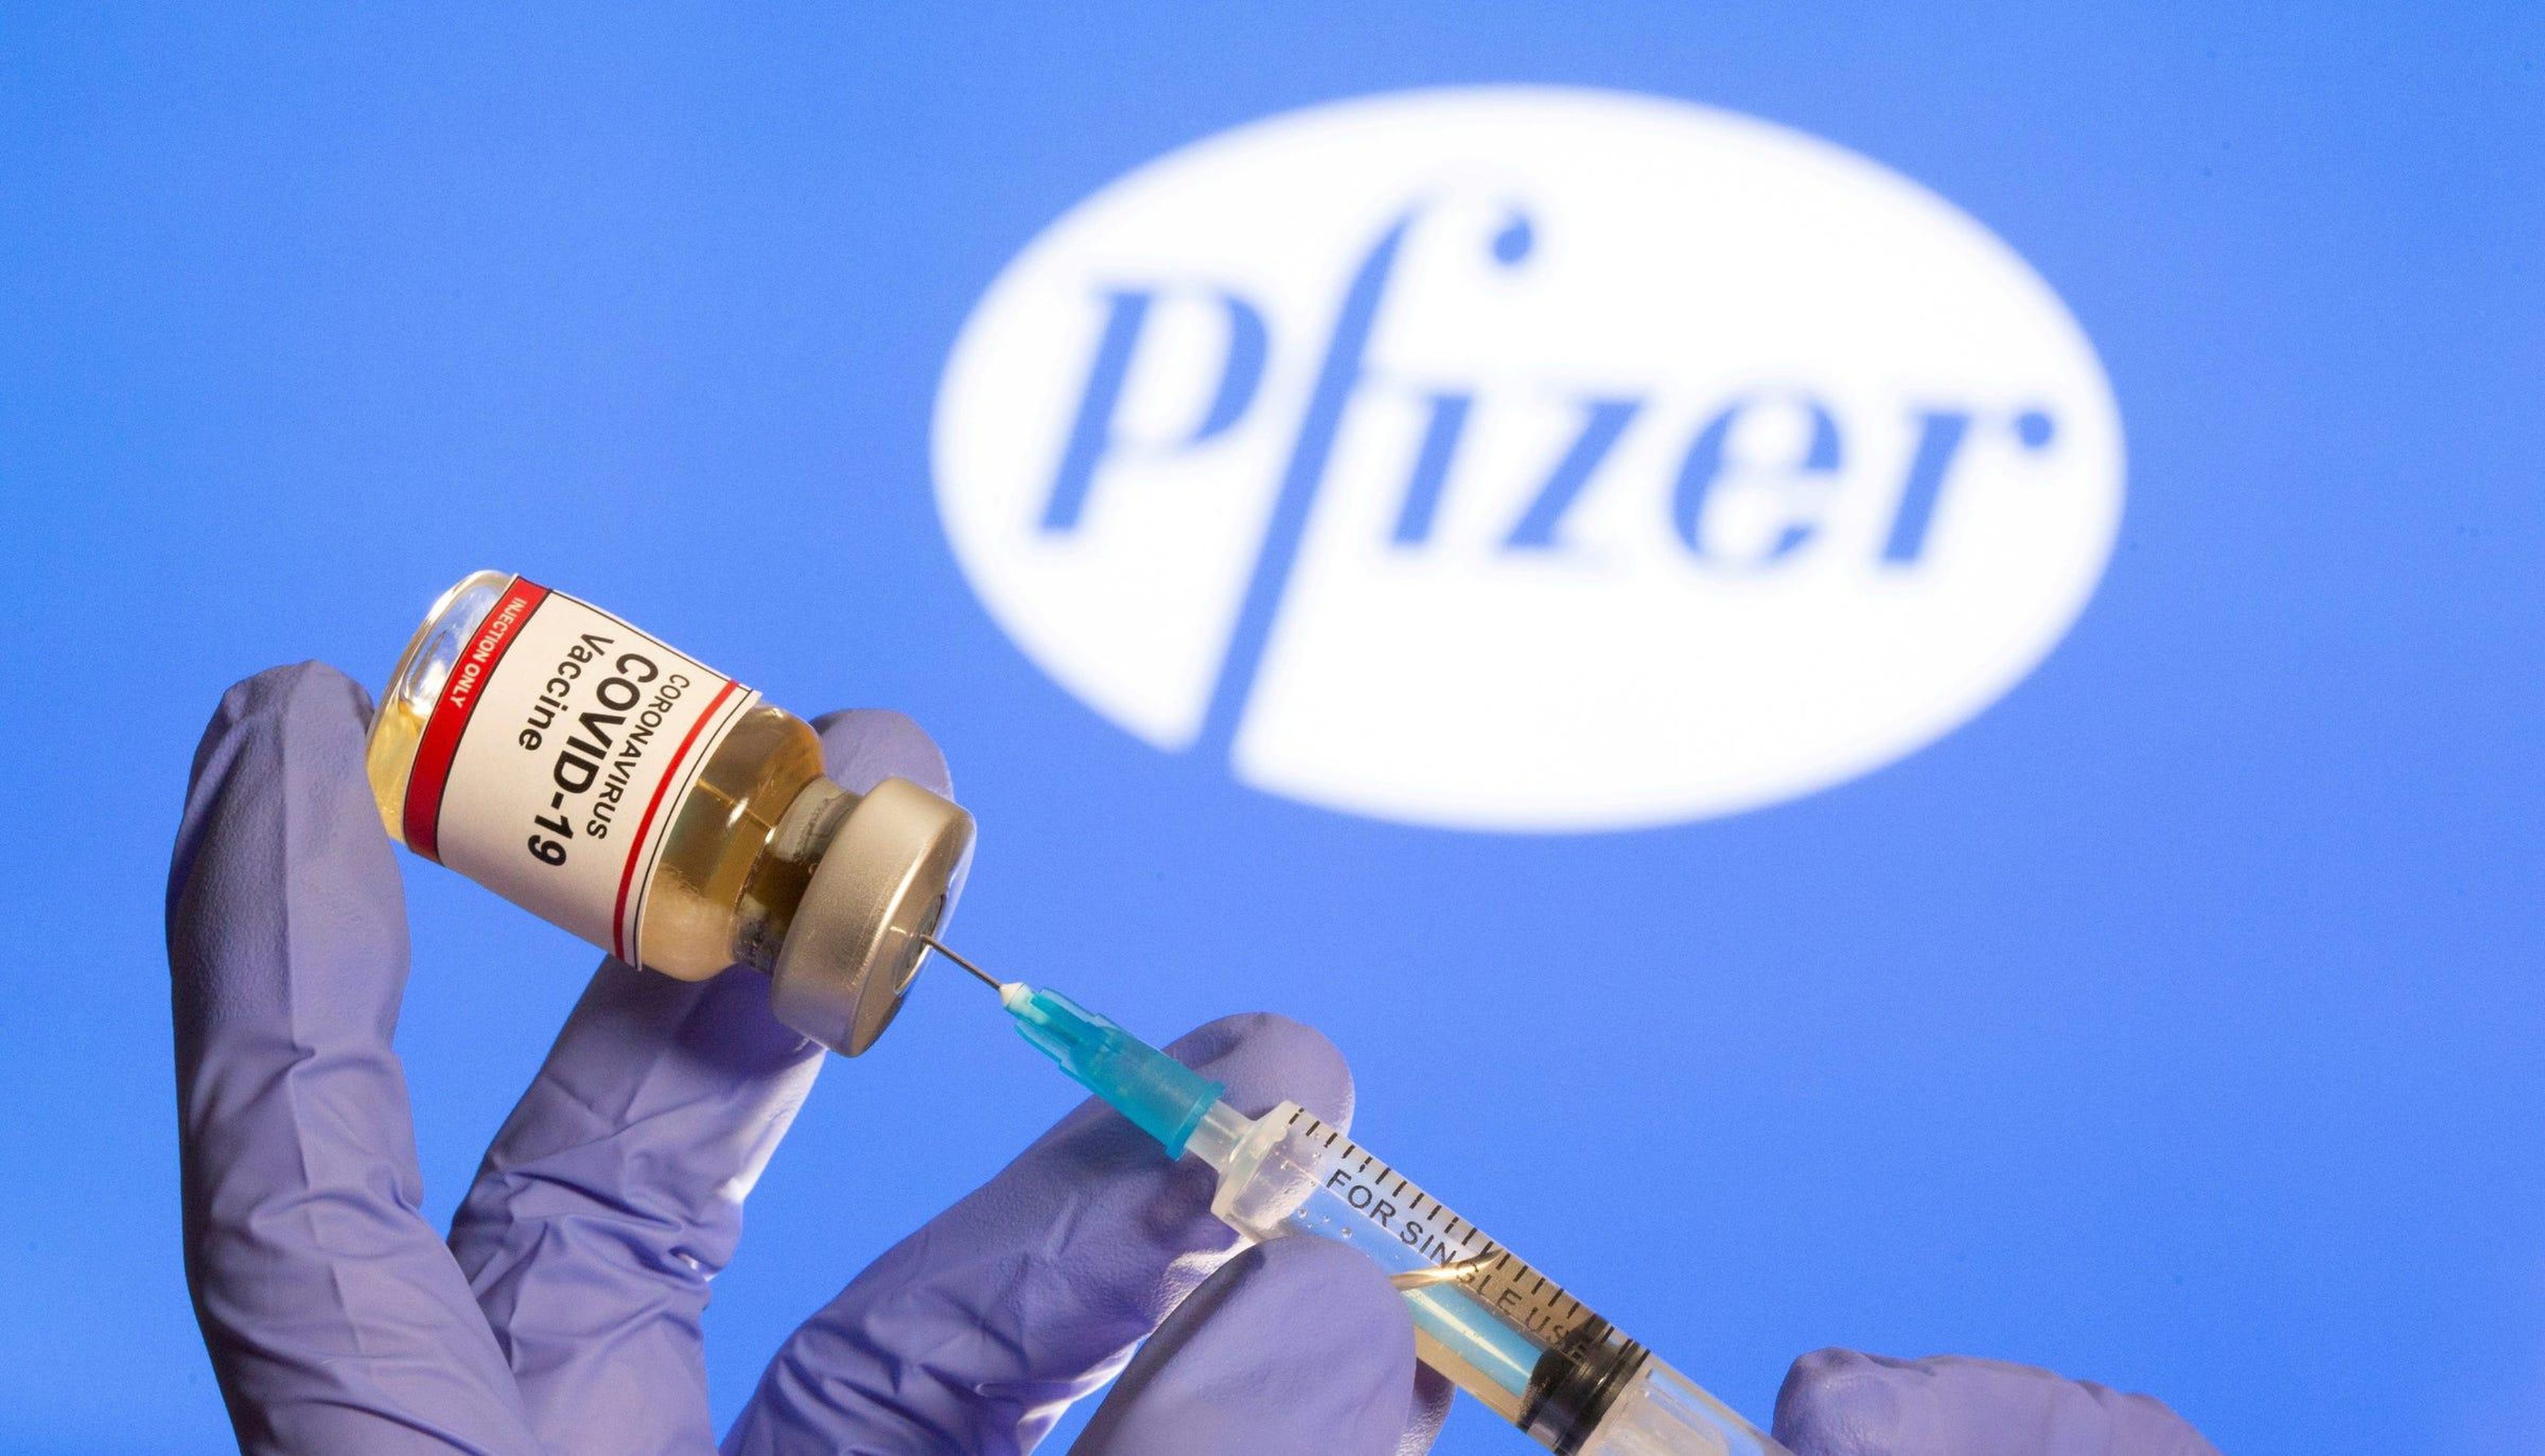 On November 9, Pfizer announced positive results from its coronavirus vaccine trial.